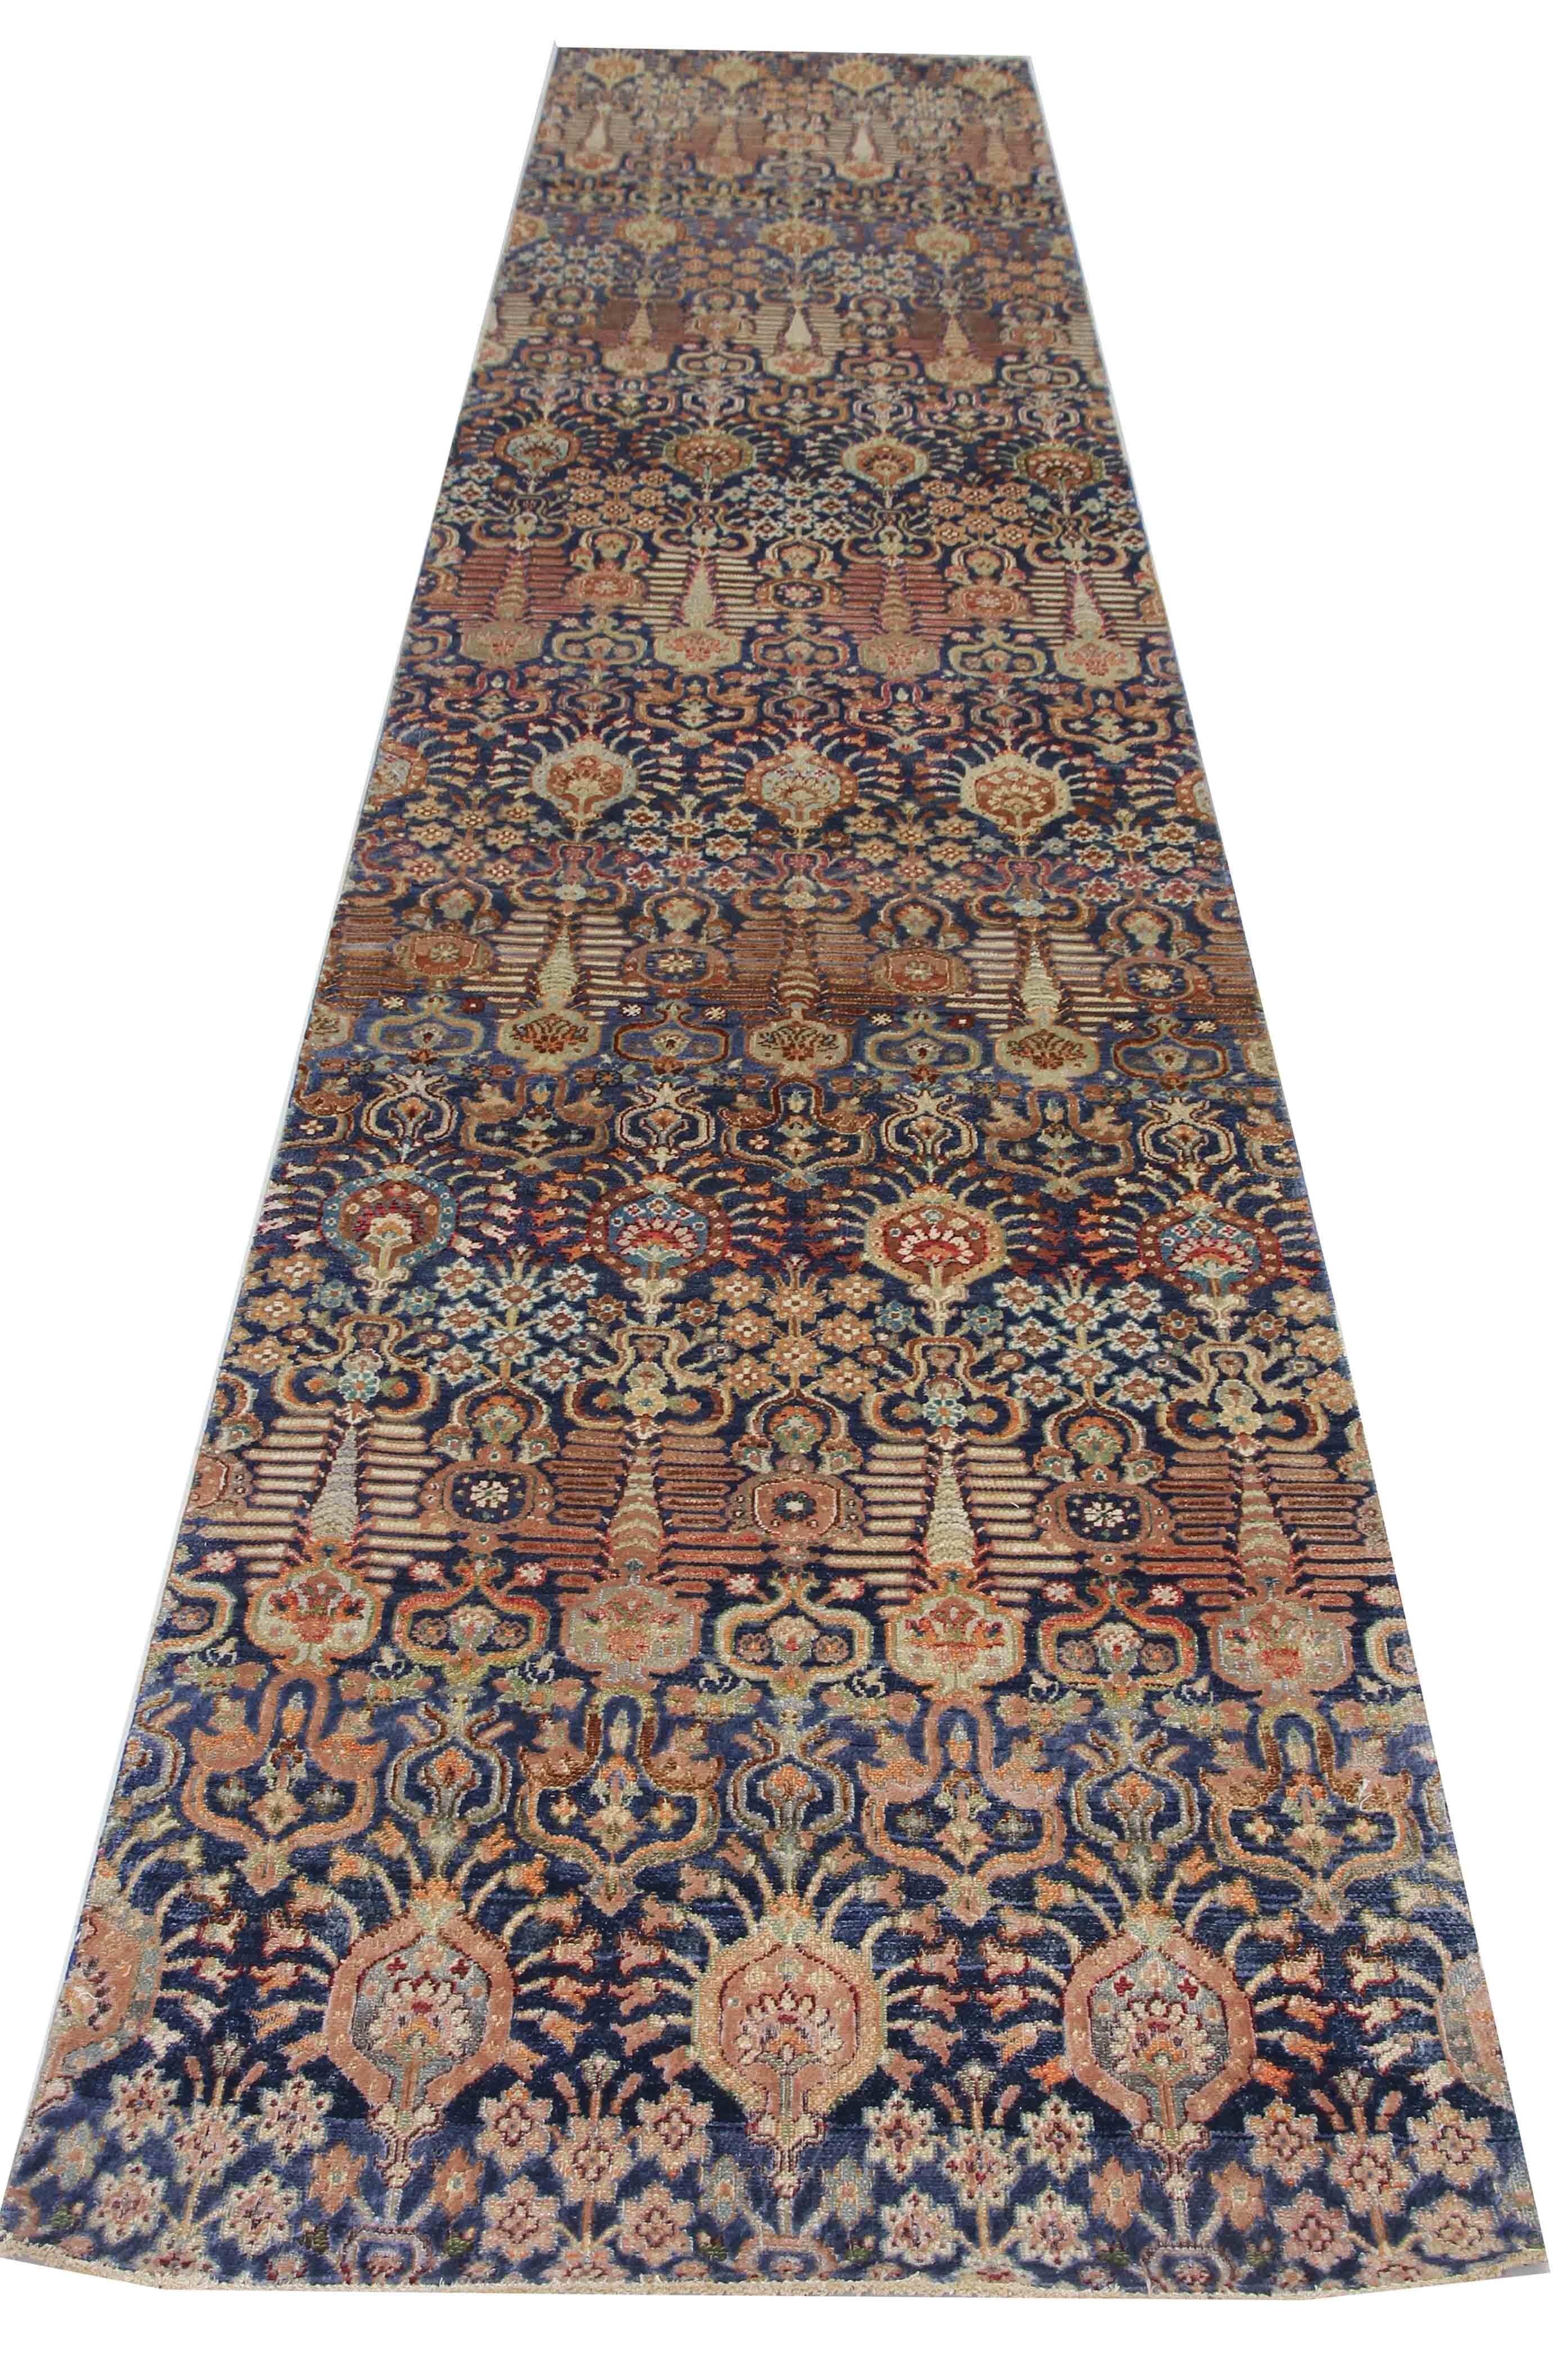 Contemporary Silk & Wool Rug - 3' x 14'11'' Runner For Sale